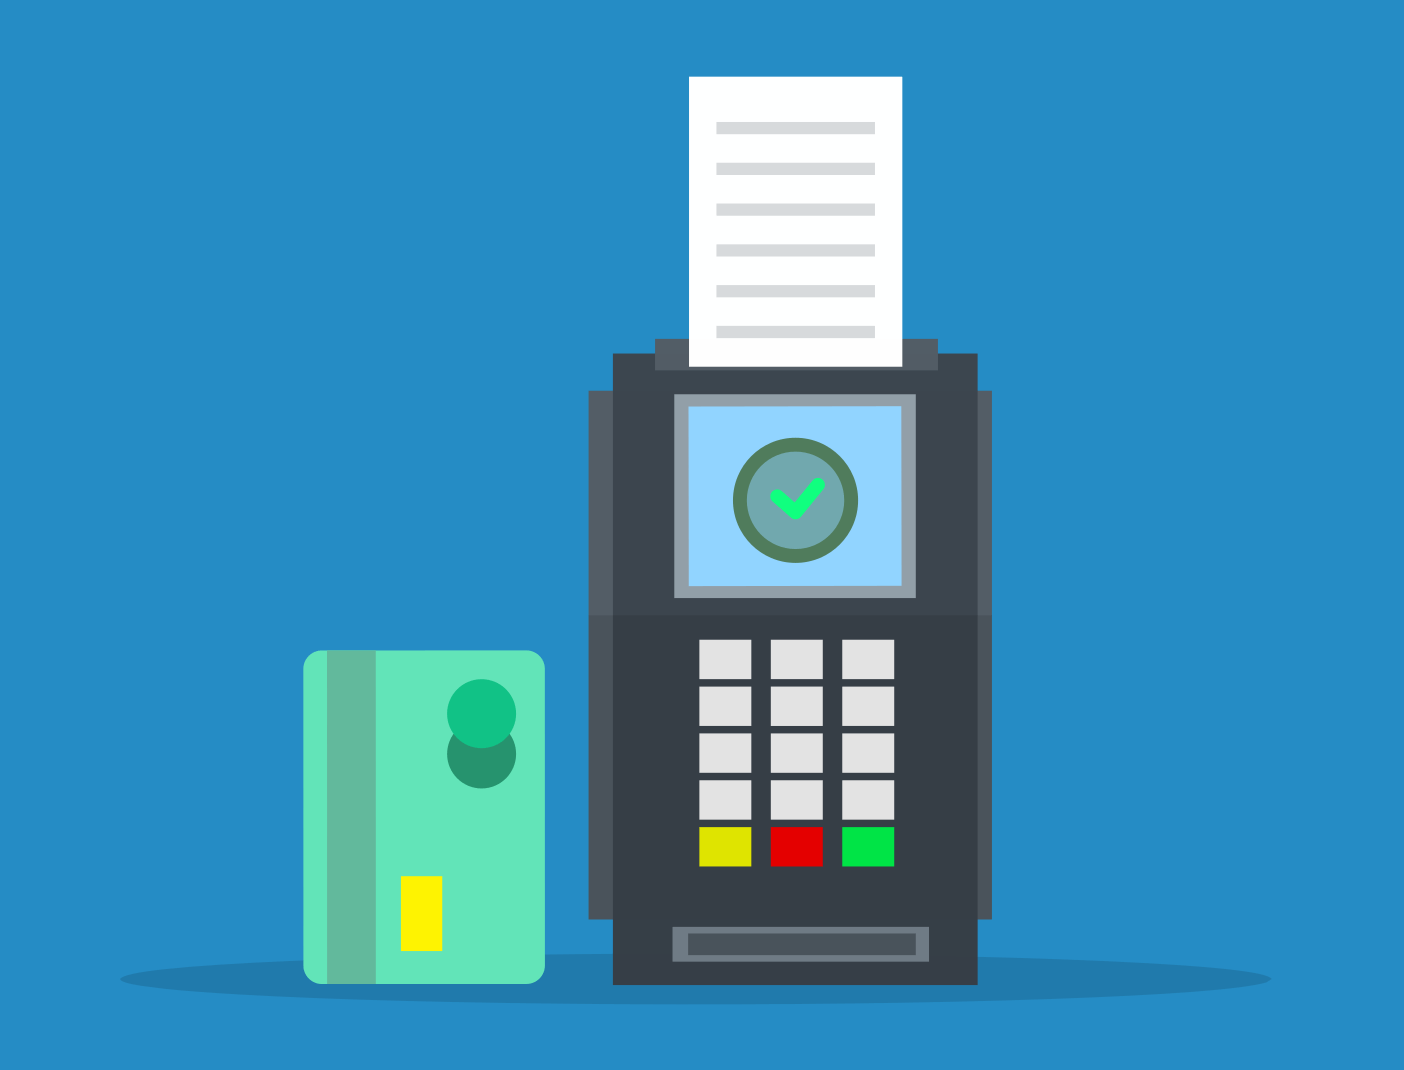 An image of a credit card next to POS systems to process payments